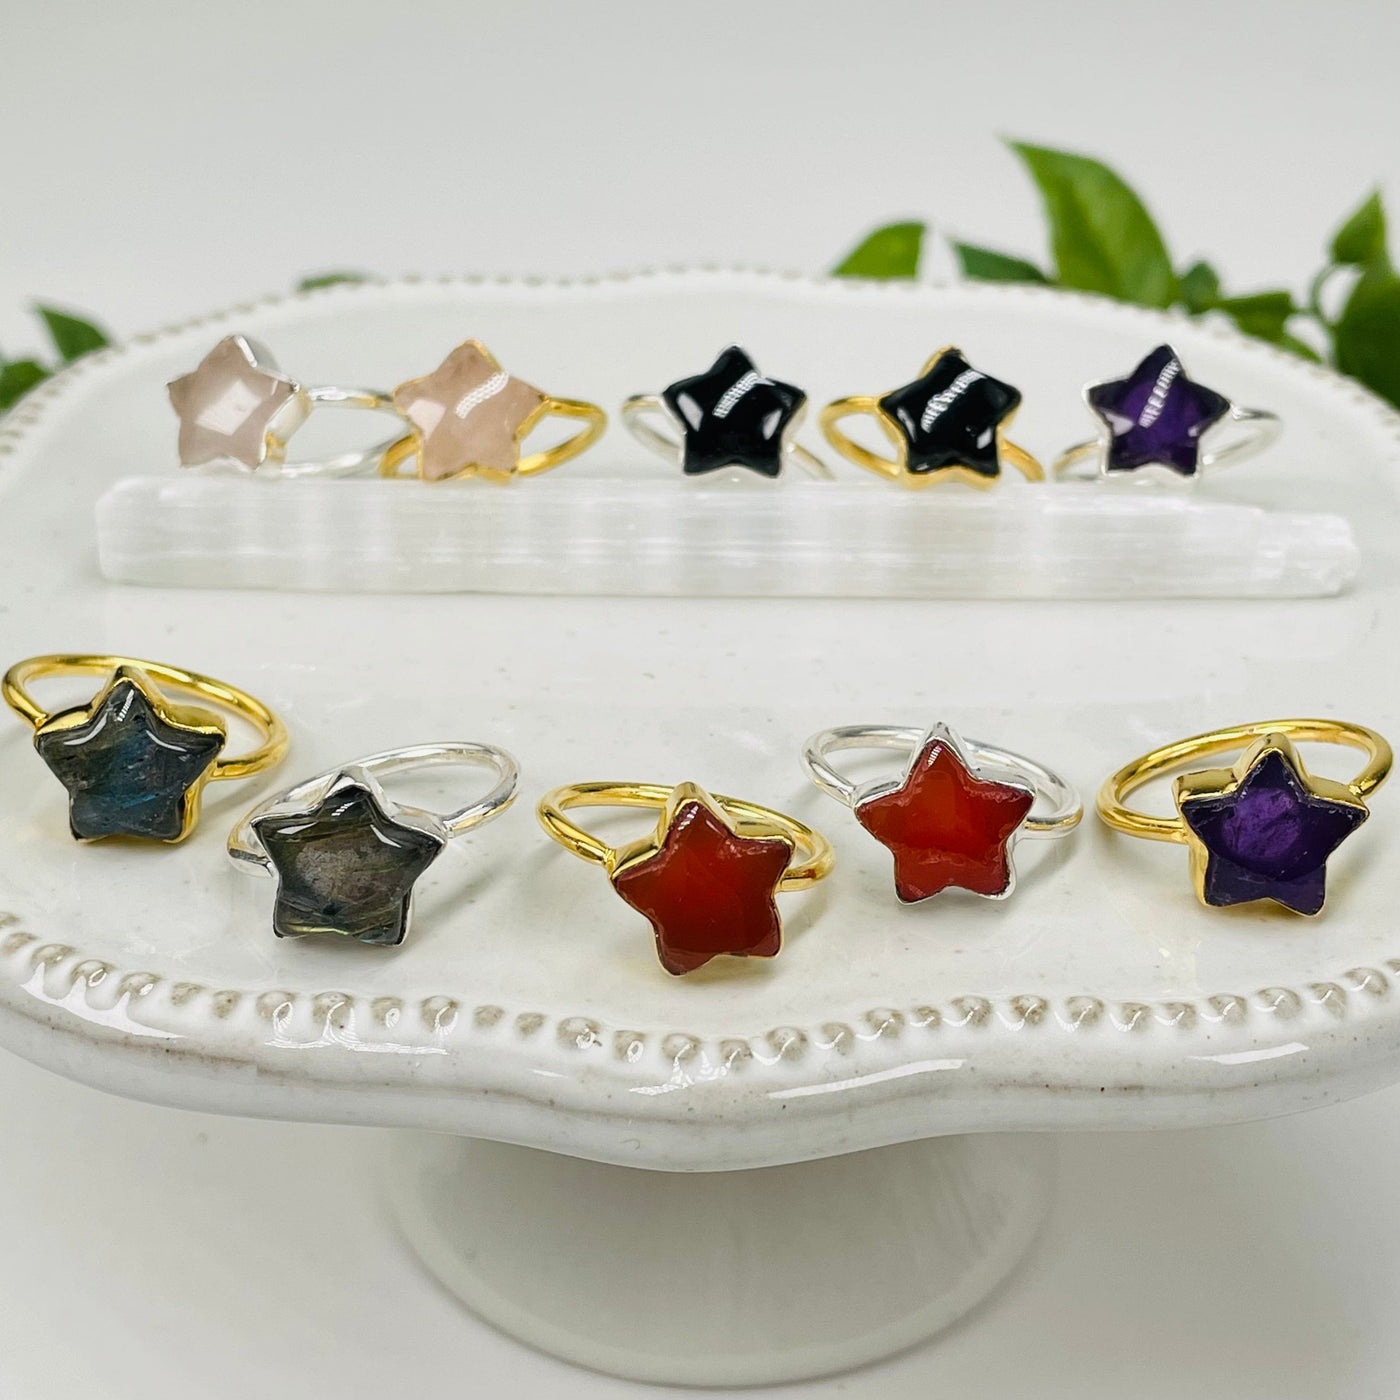 gemstone star rings come in sterling silver or gold over sterling silver 